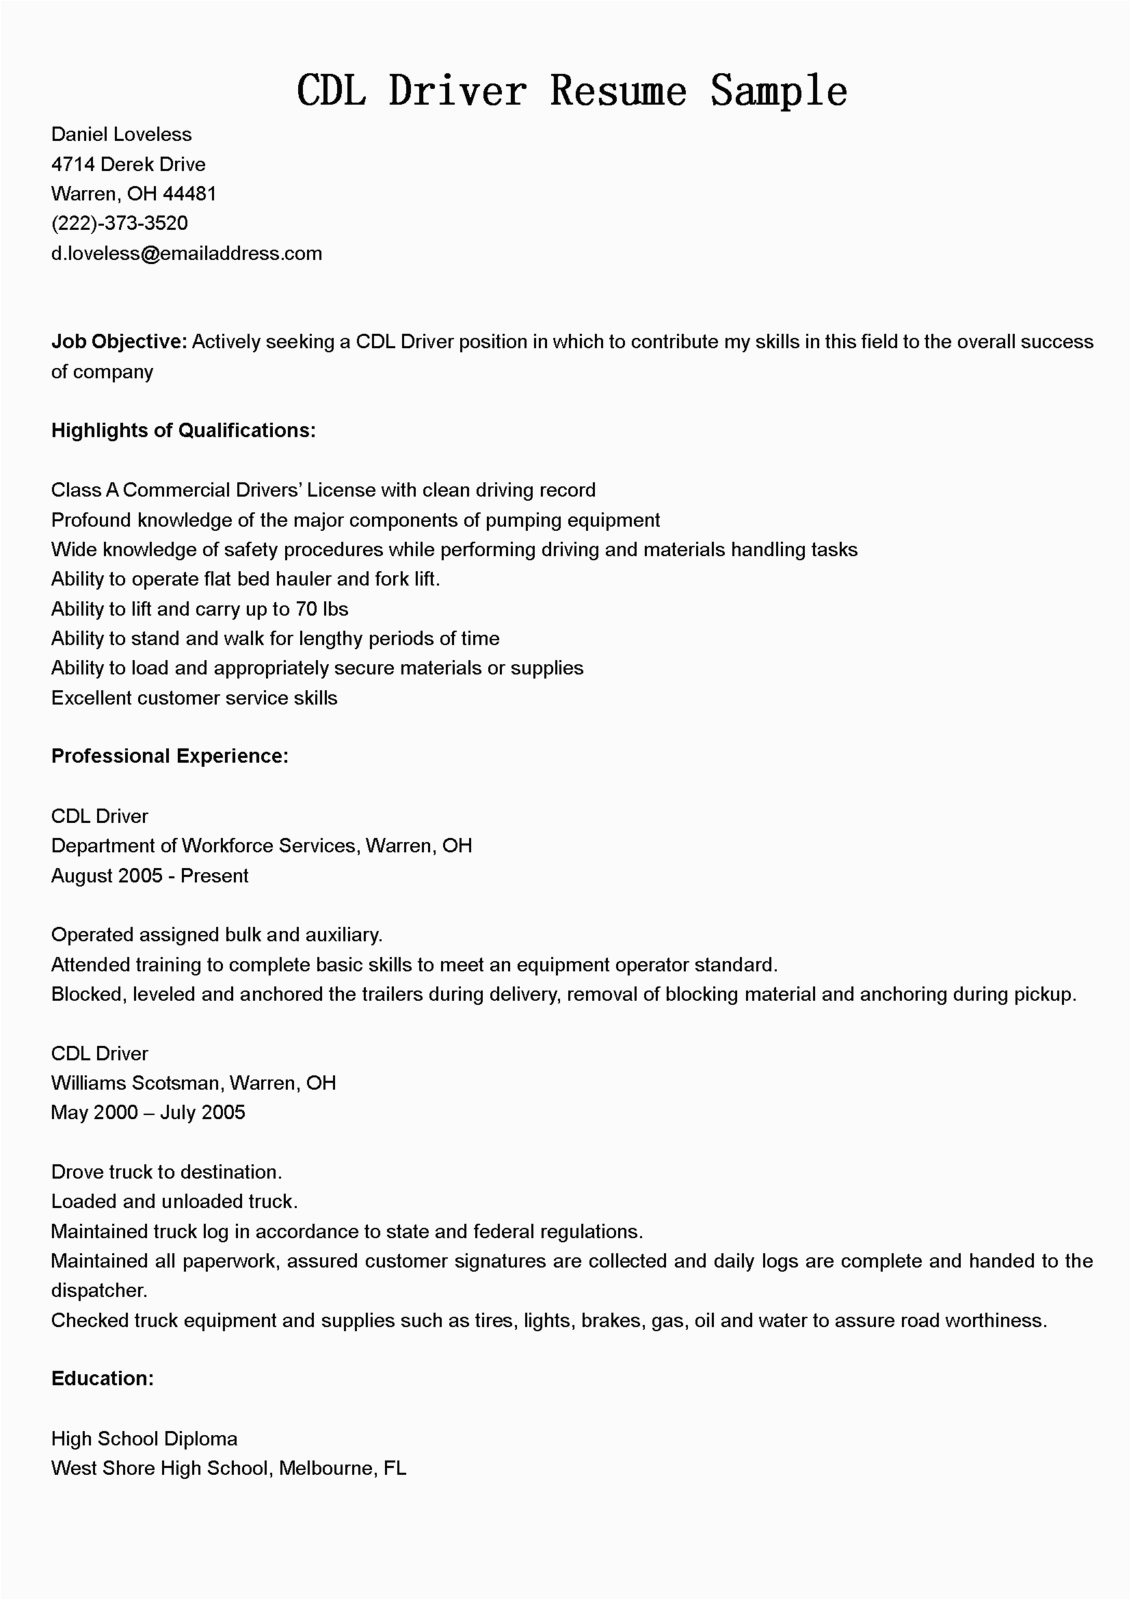 Cdl Class A Truck Driver Resume Sample Driver Resumes Cdl Driver Resume Sample